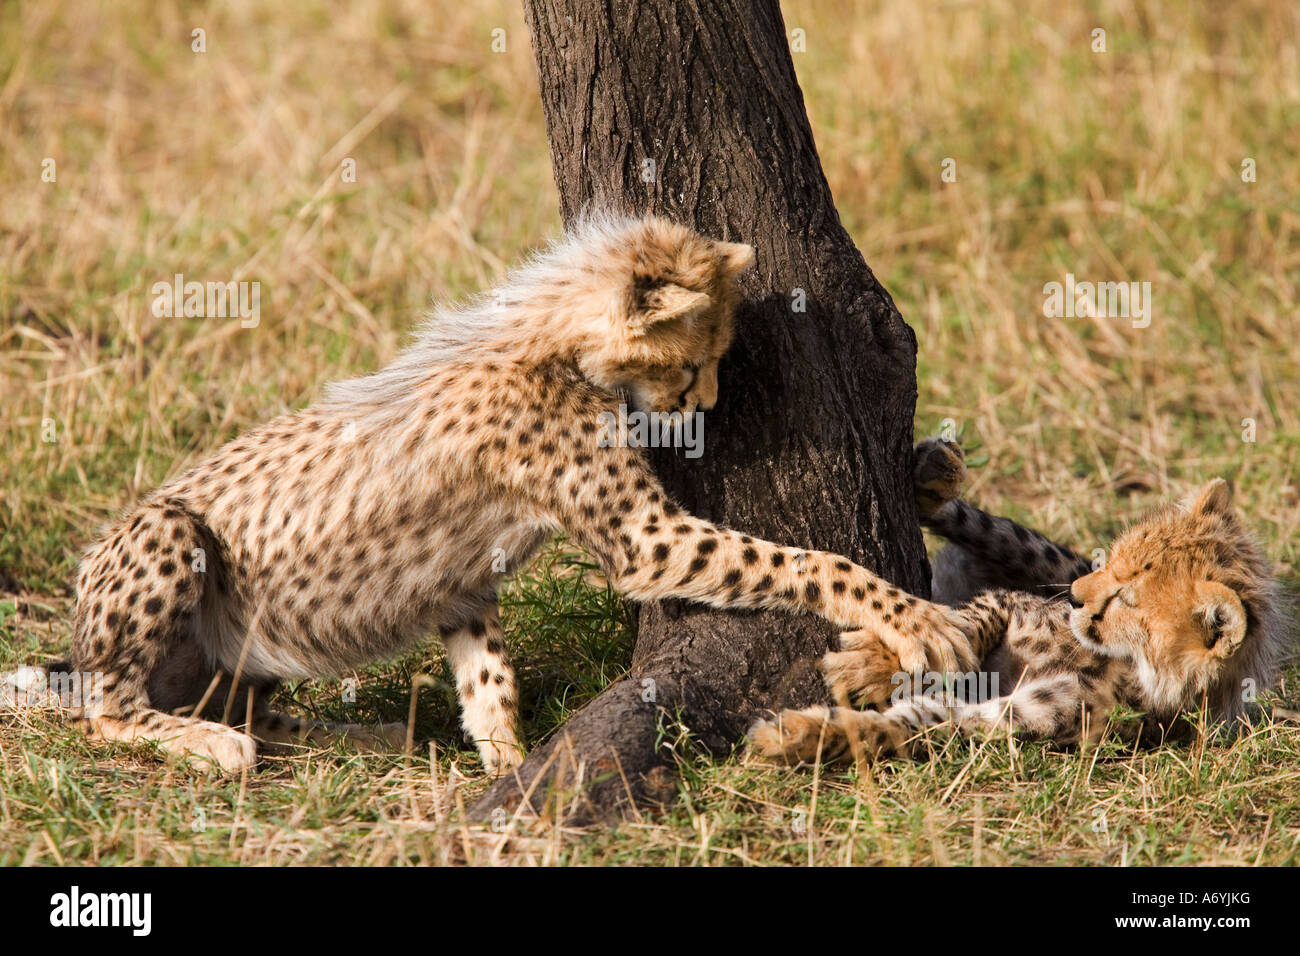 Two cheetah cubs playing Stock Photo